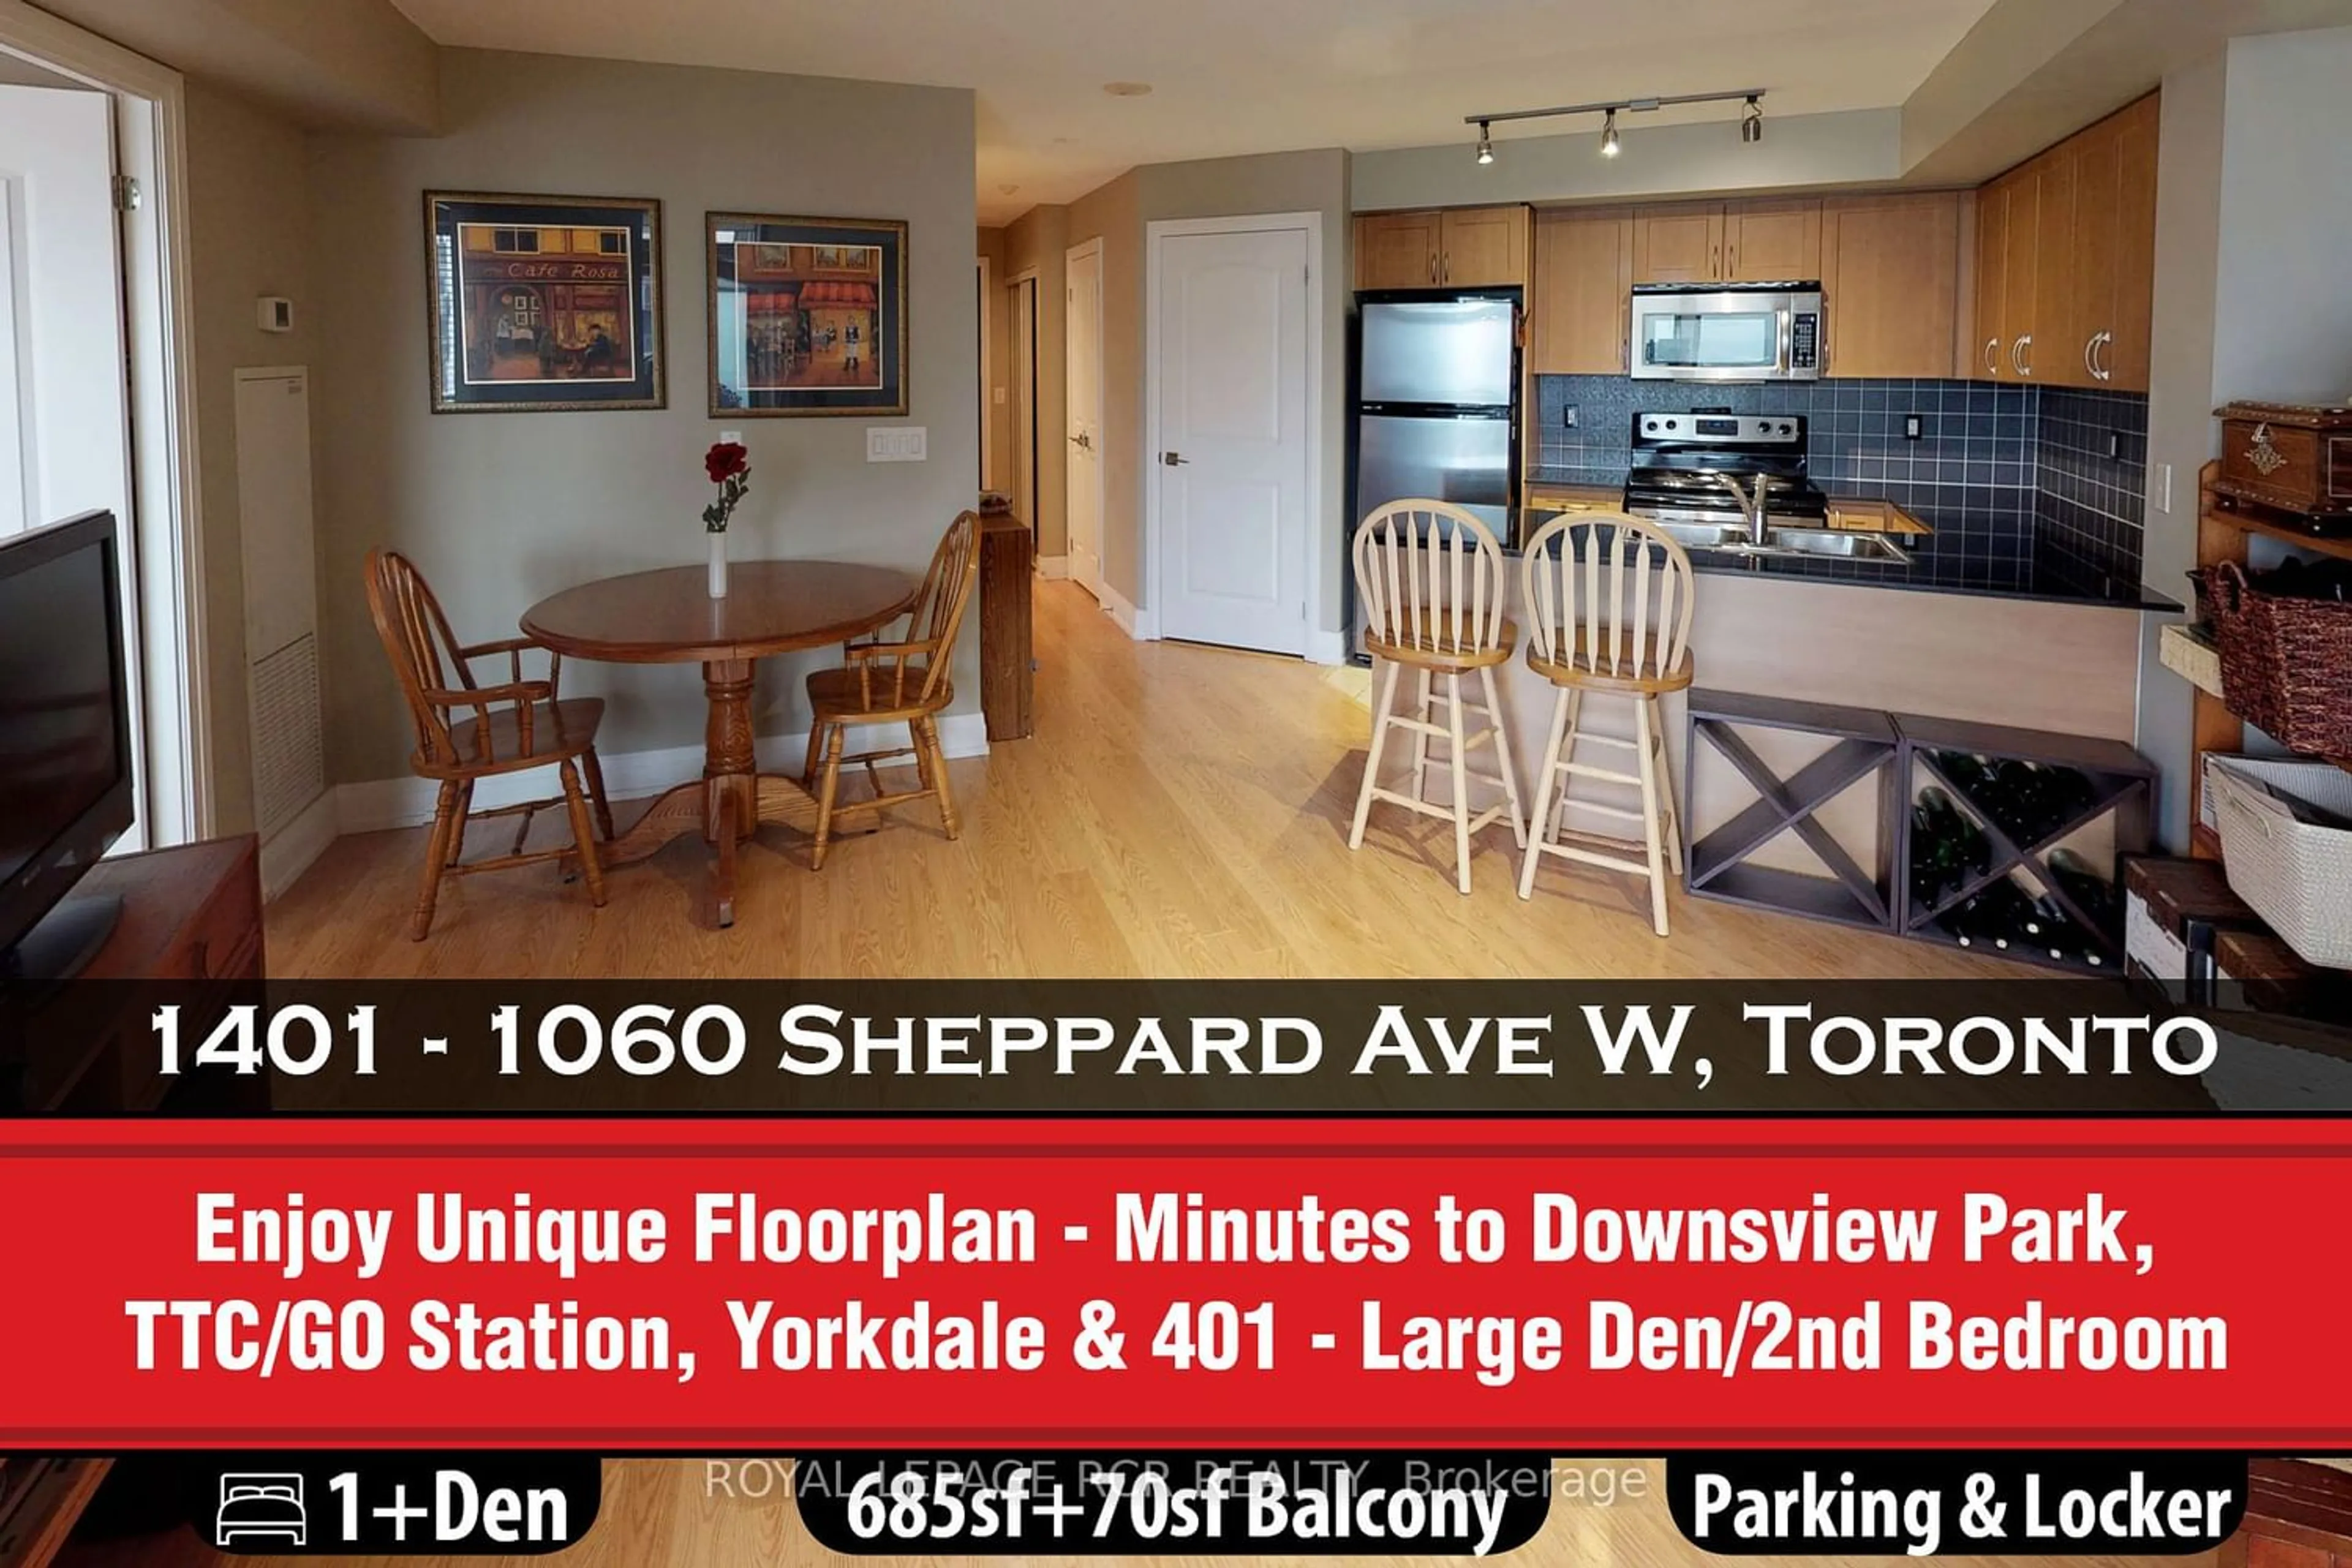 A pic from exterior of the house or condo for 1060 Sheppard Ave #1401, Toronto Ontario M3J 0G7